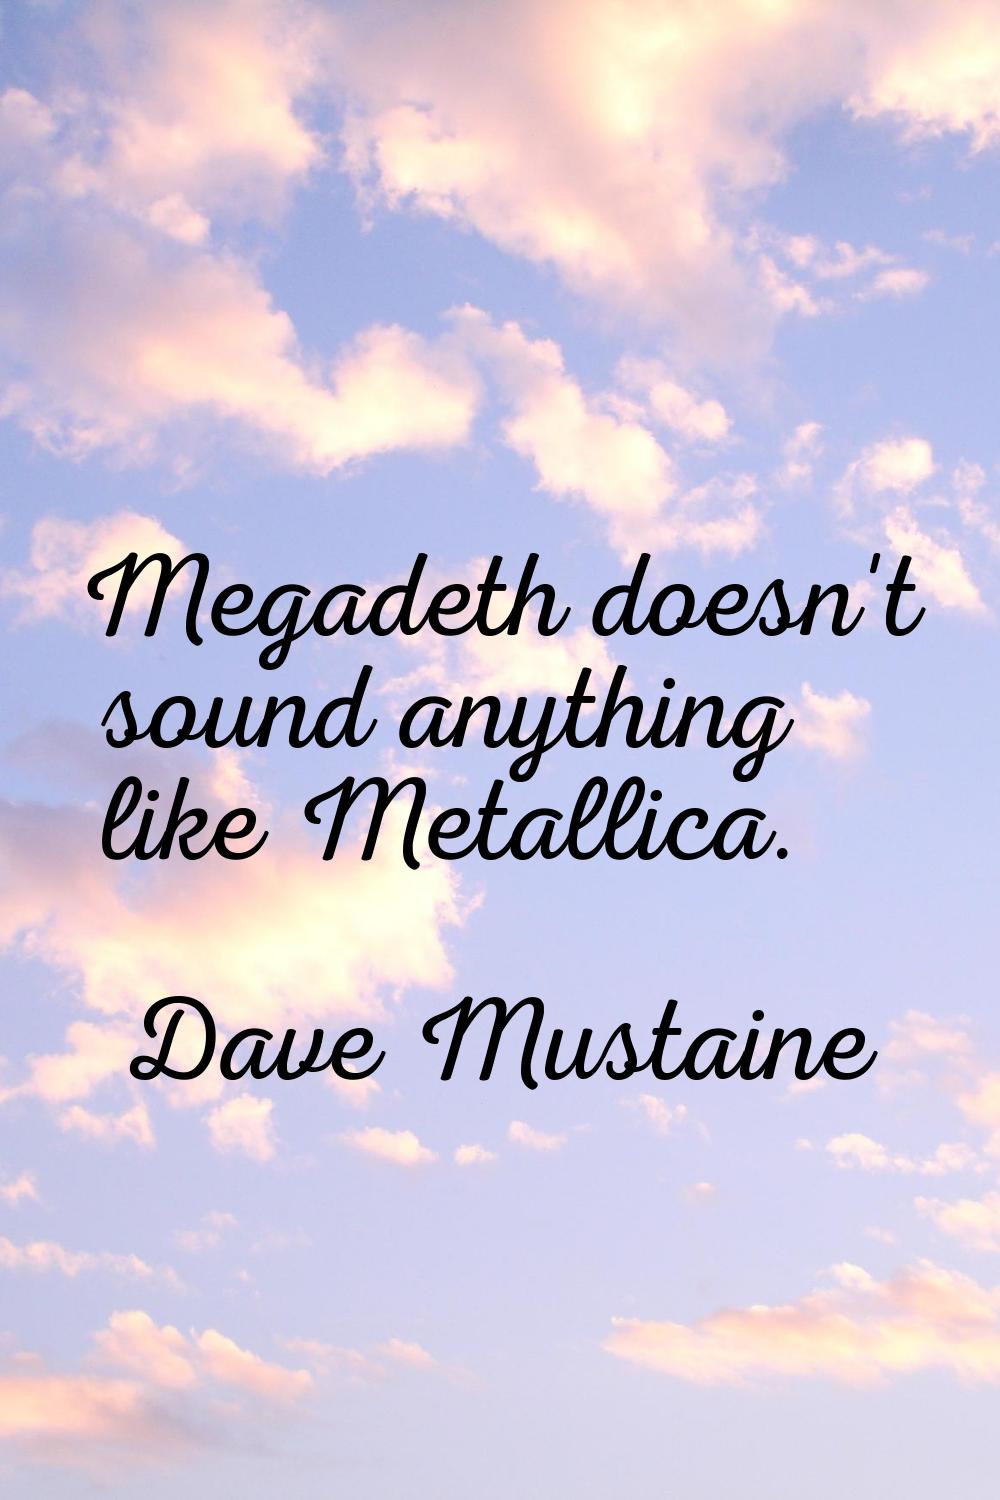 Megadeth doesn't sound anything like Metallica.